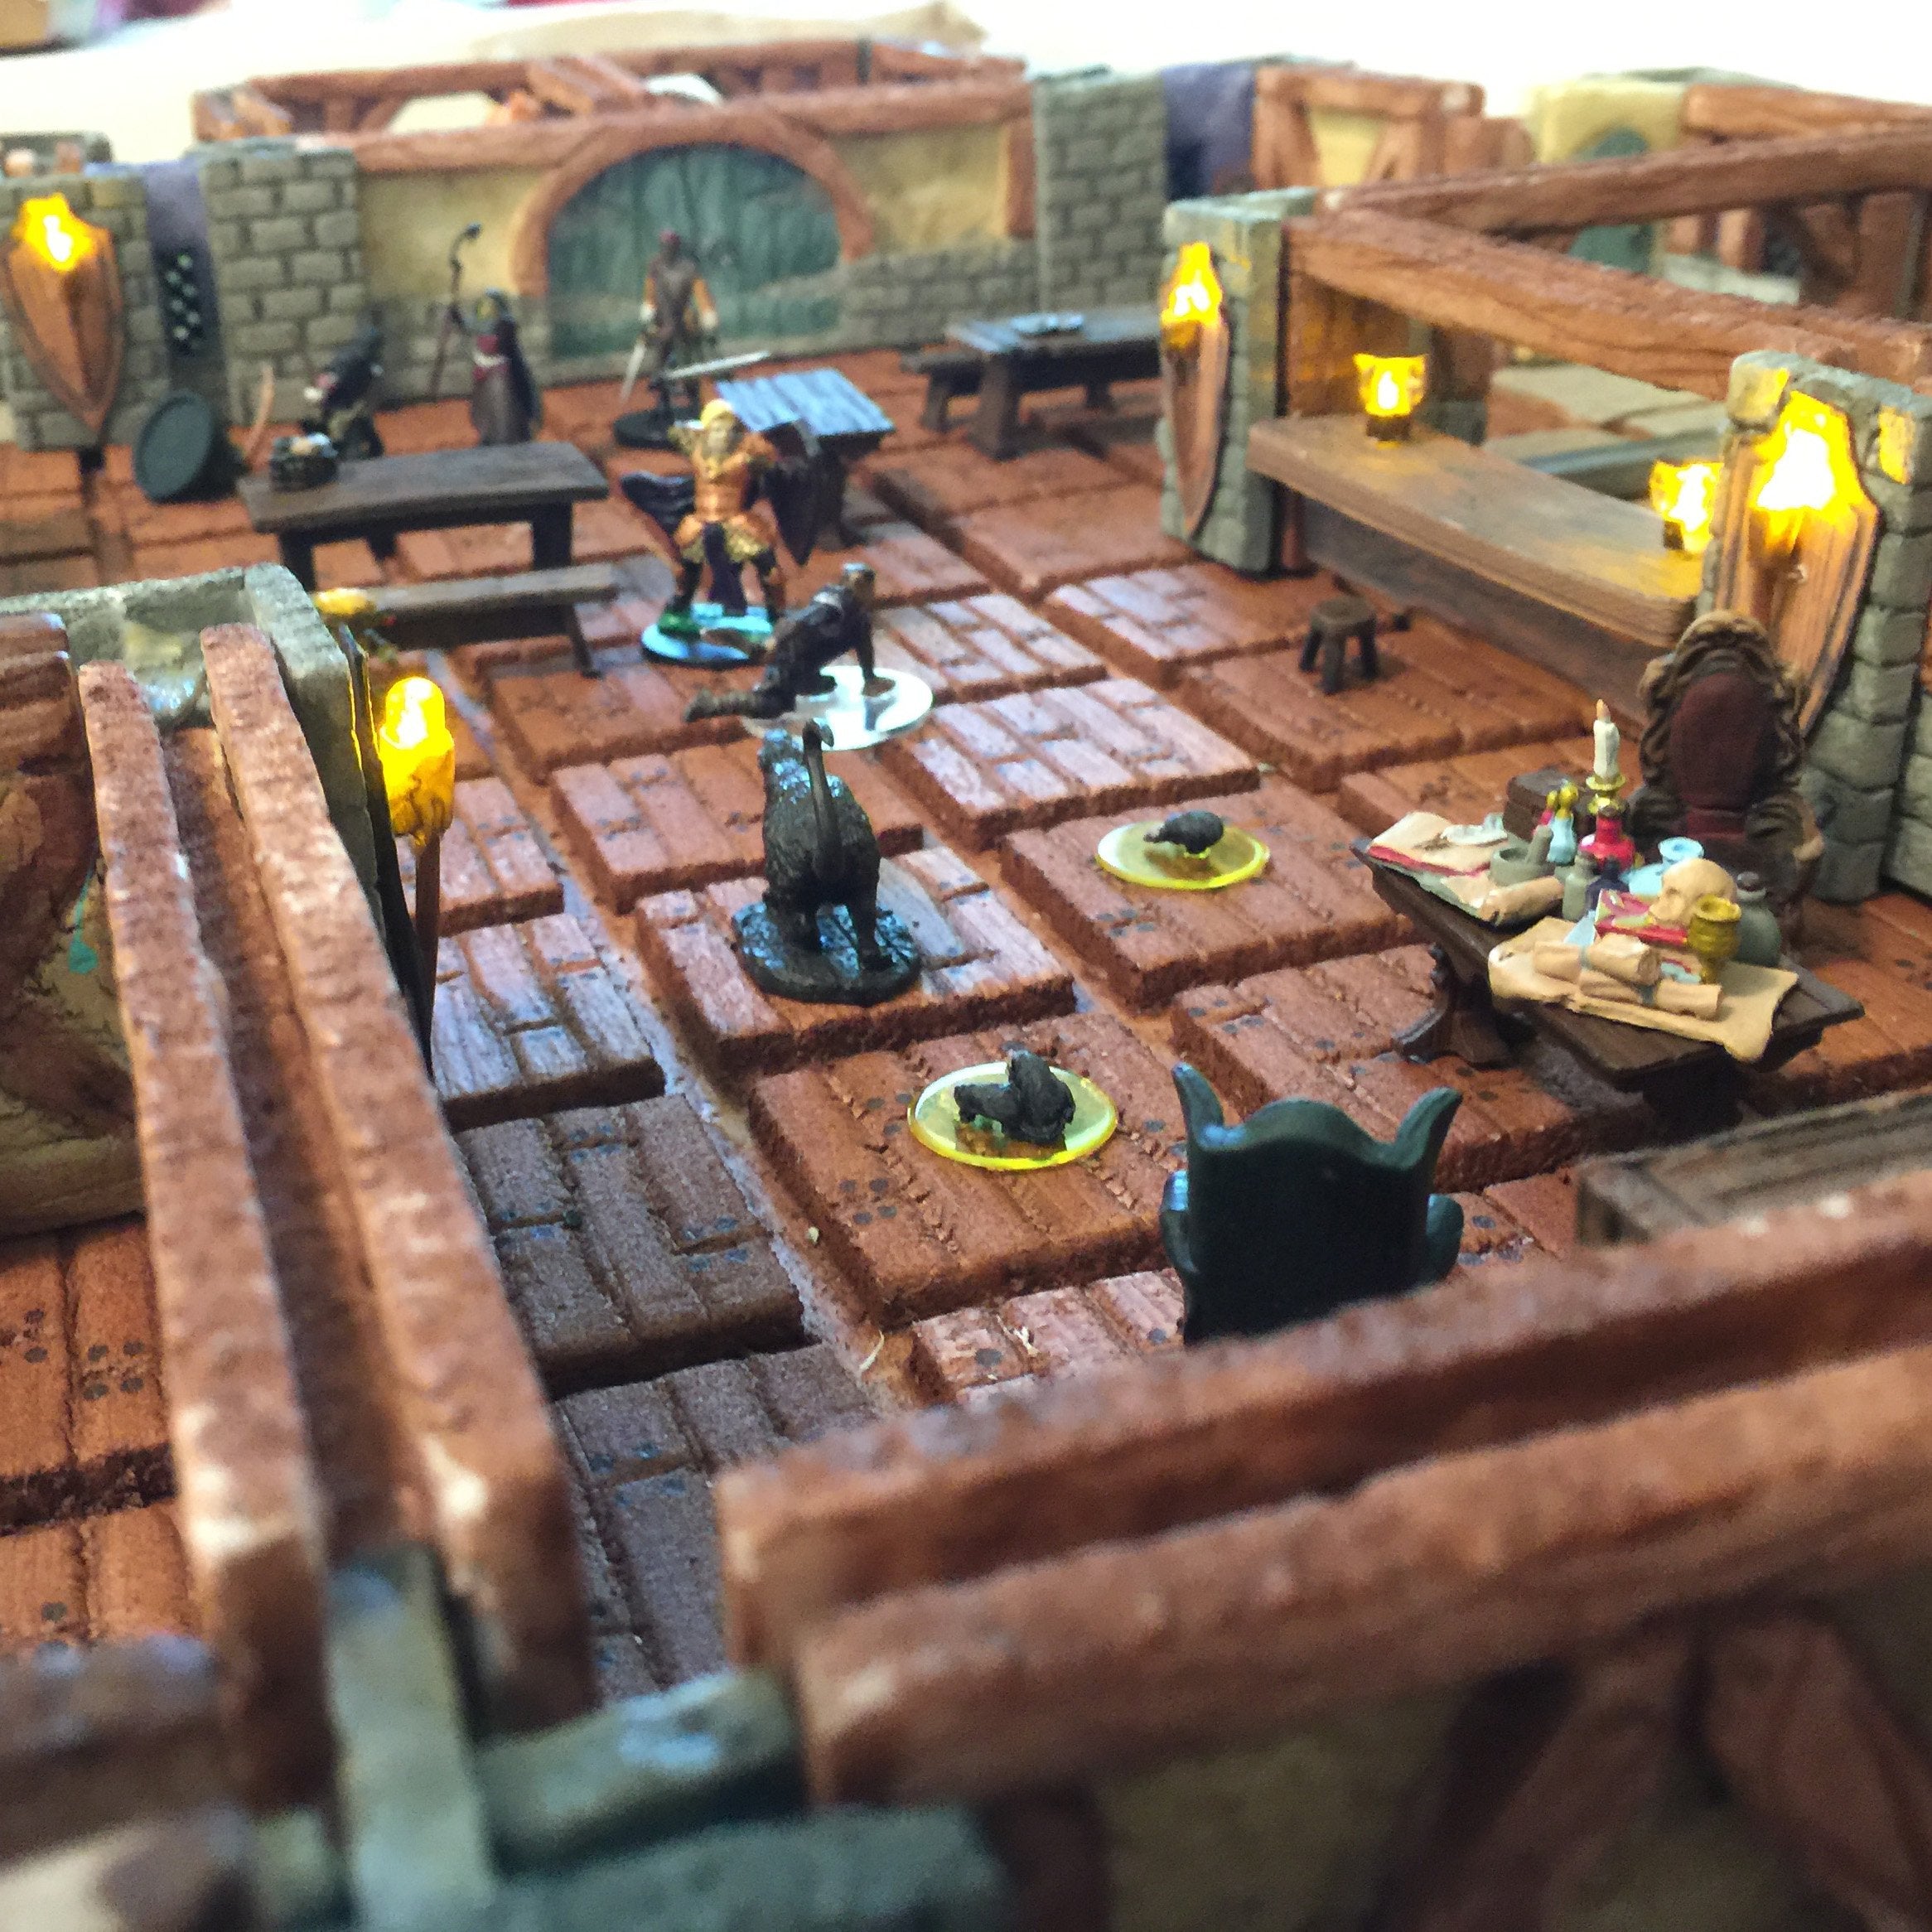 D&D terrain with lighting. Perfect for 28mm miniatures.